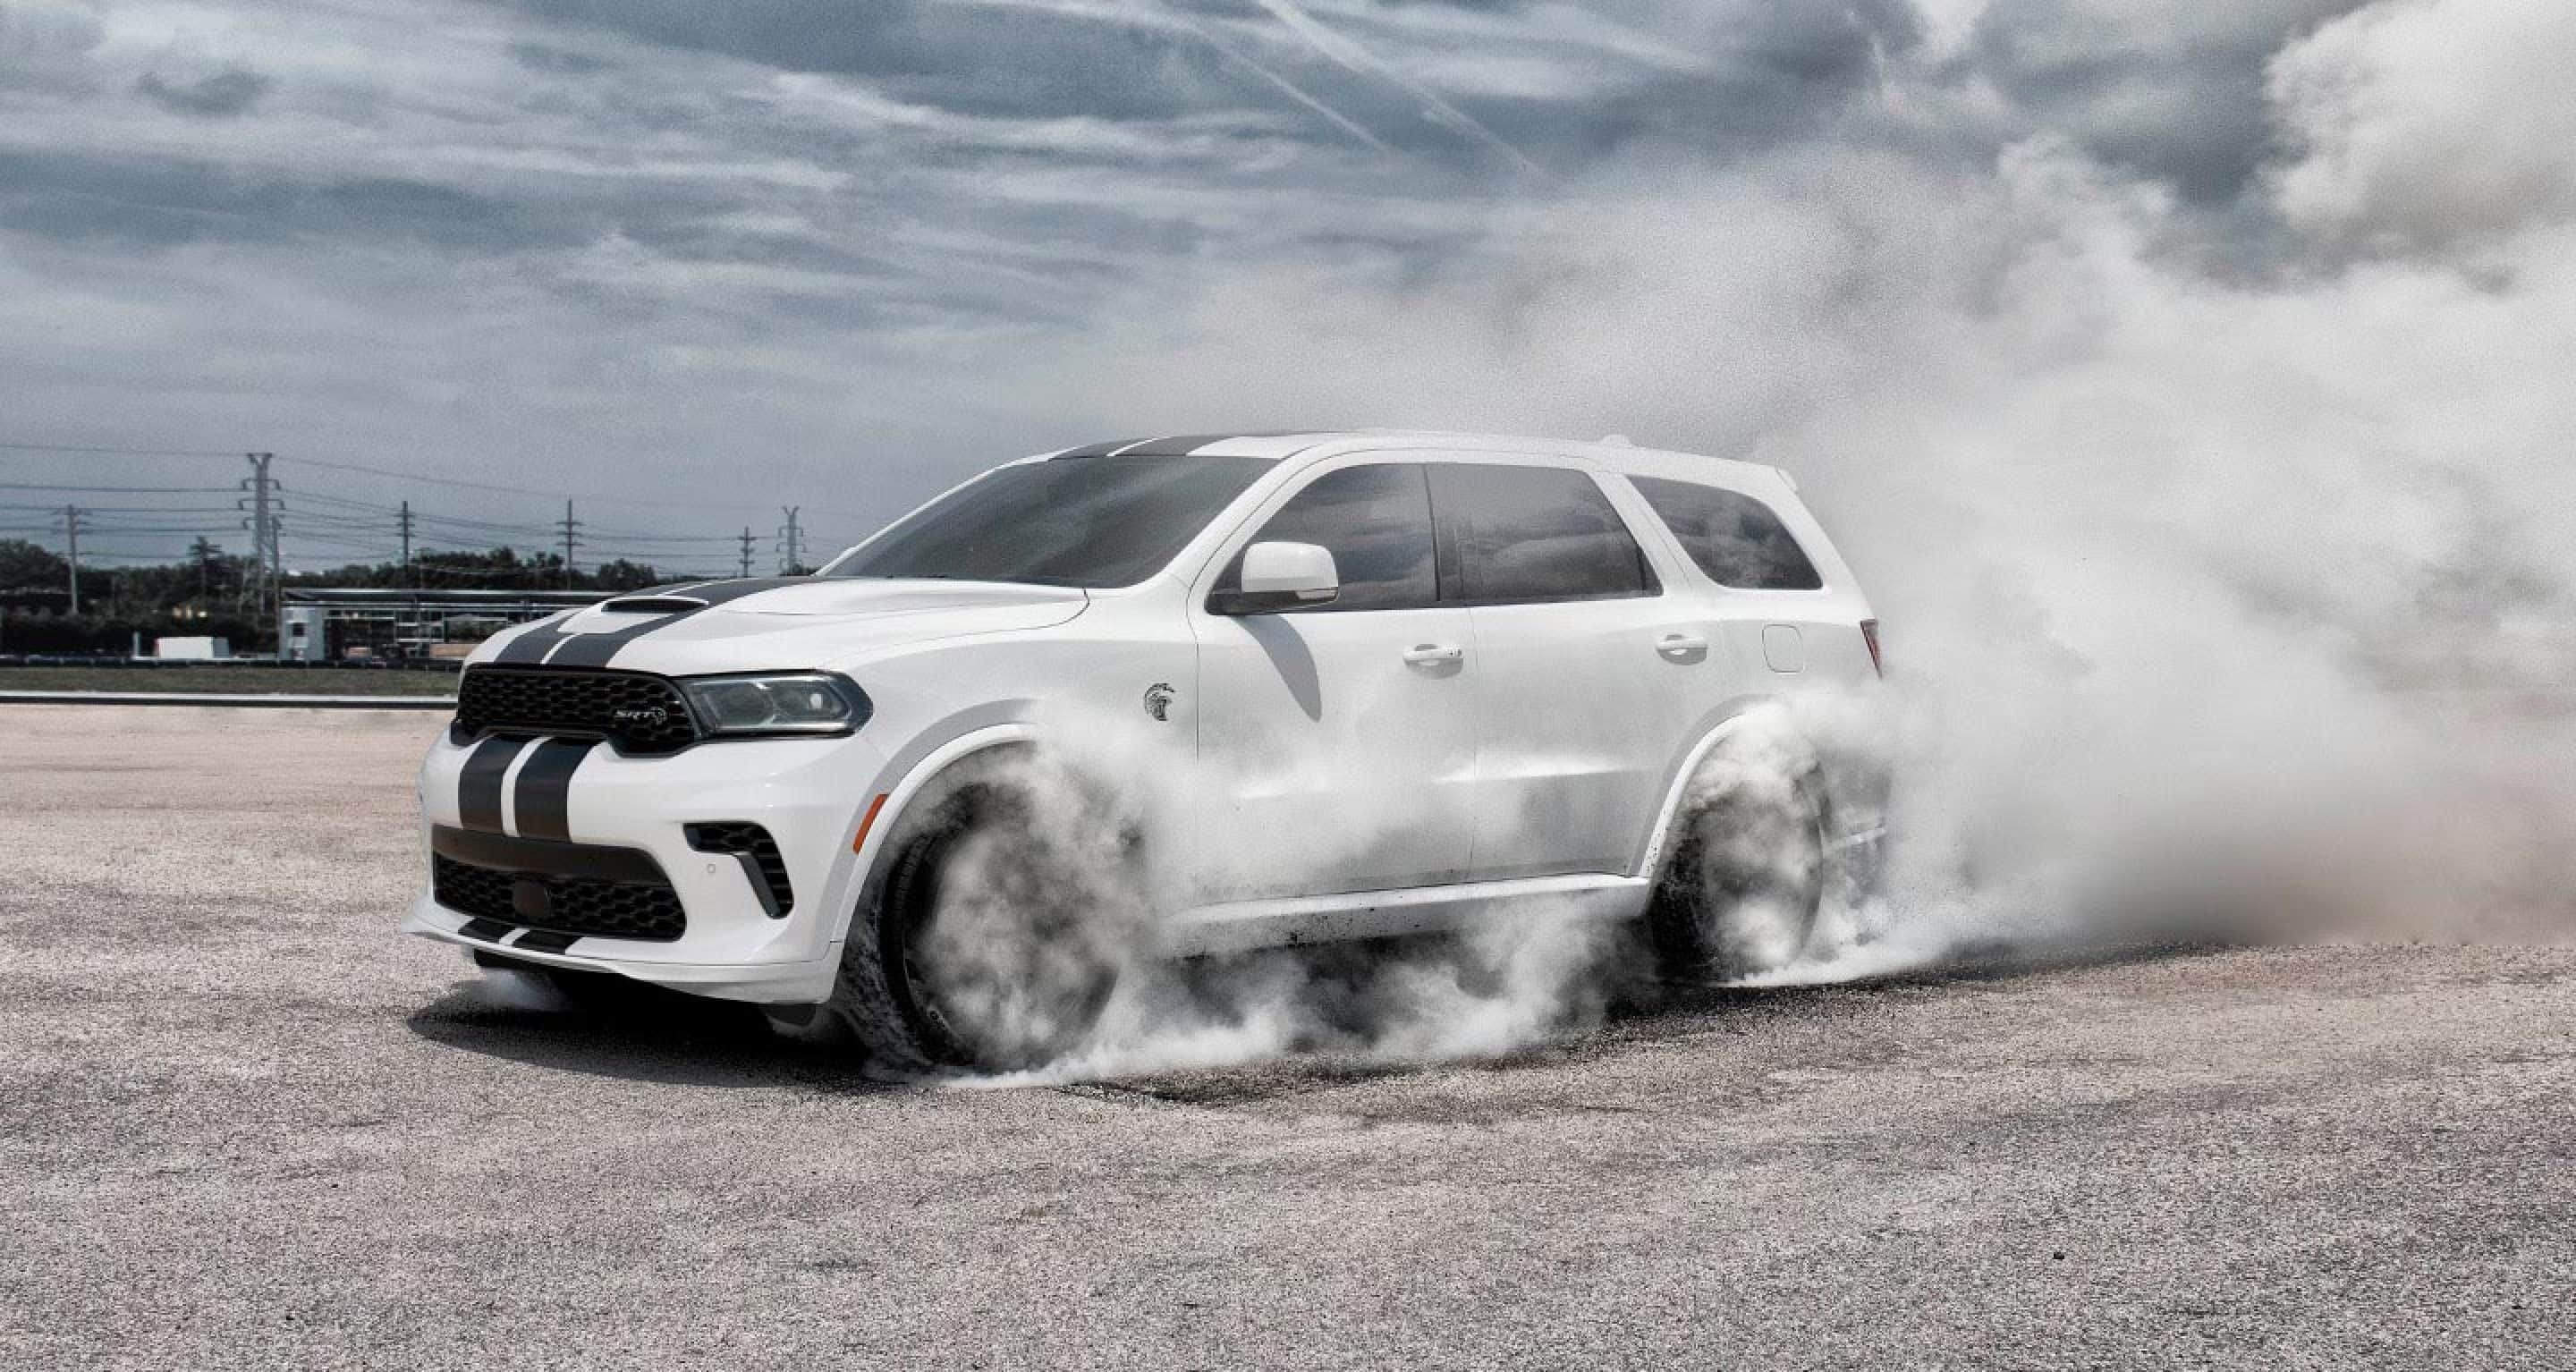 Dodge Durango SRT Hellcat is the most powerful SUV ever